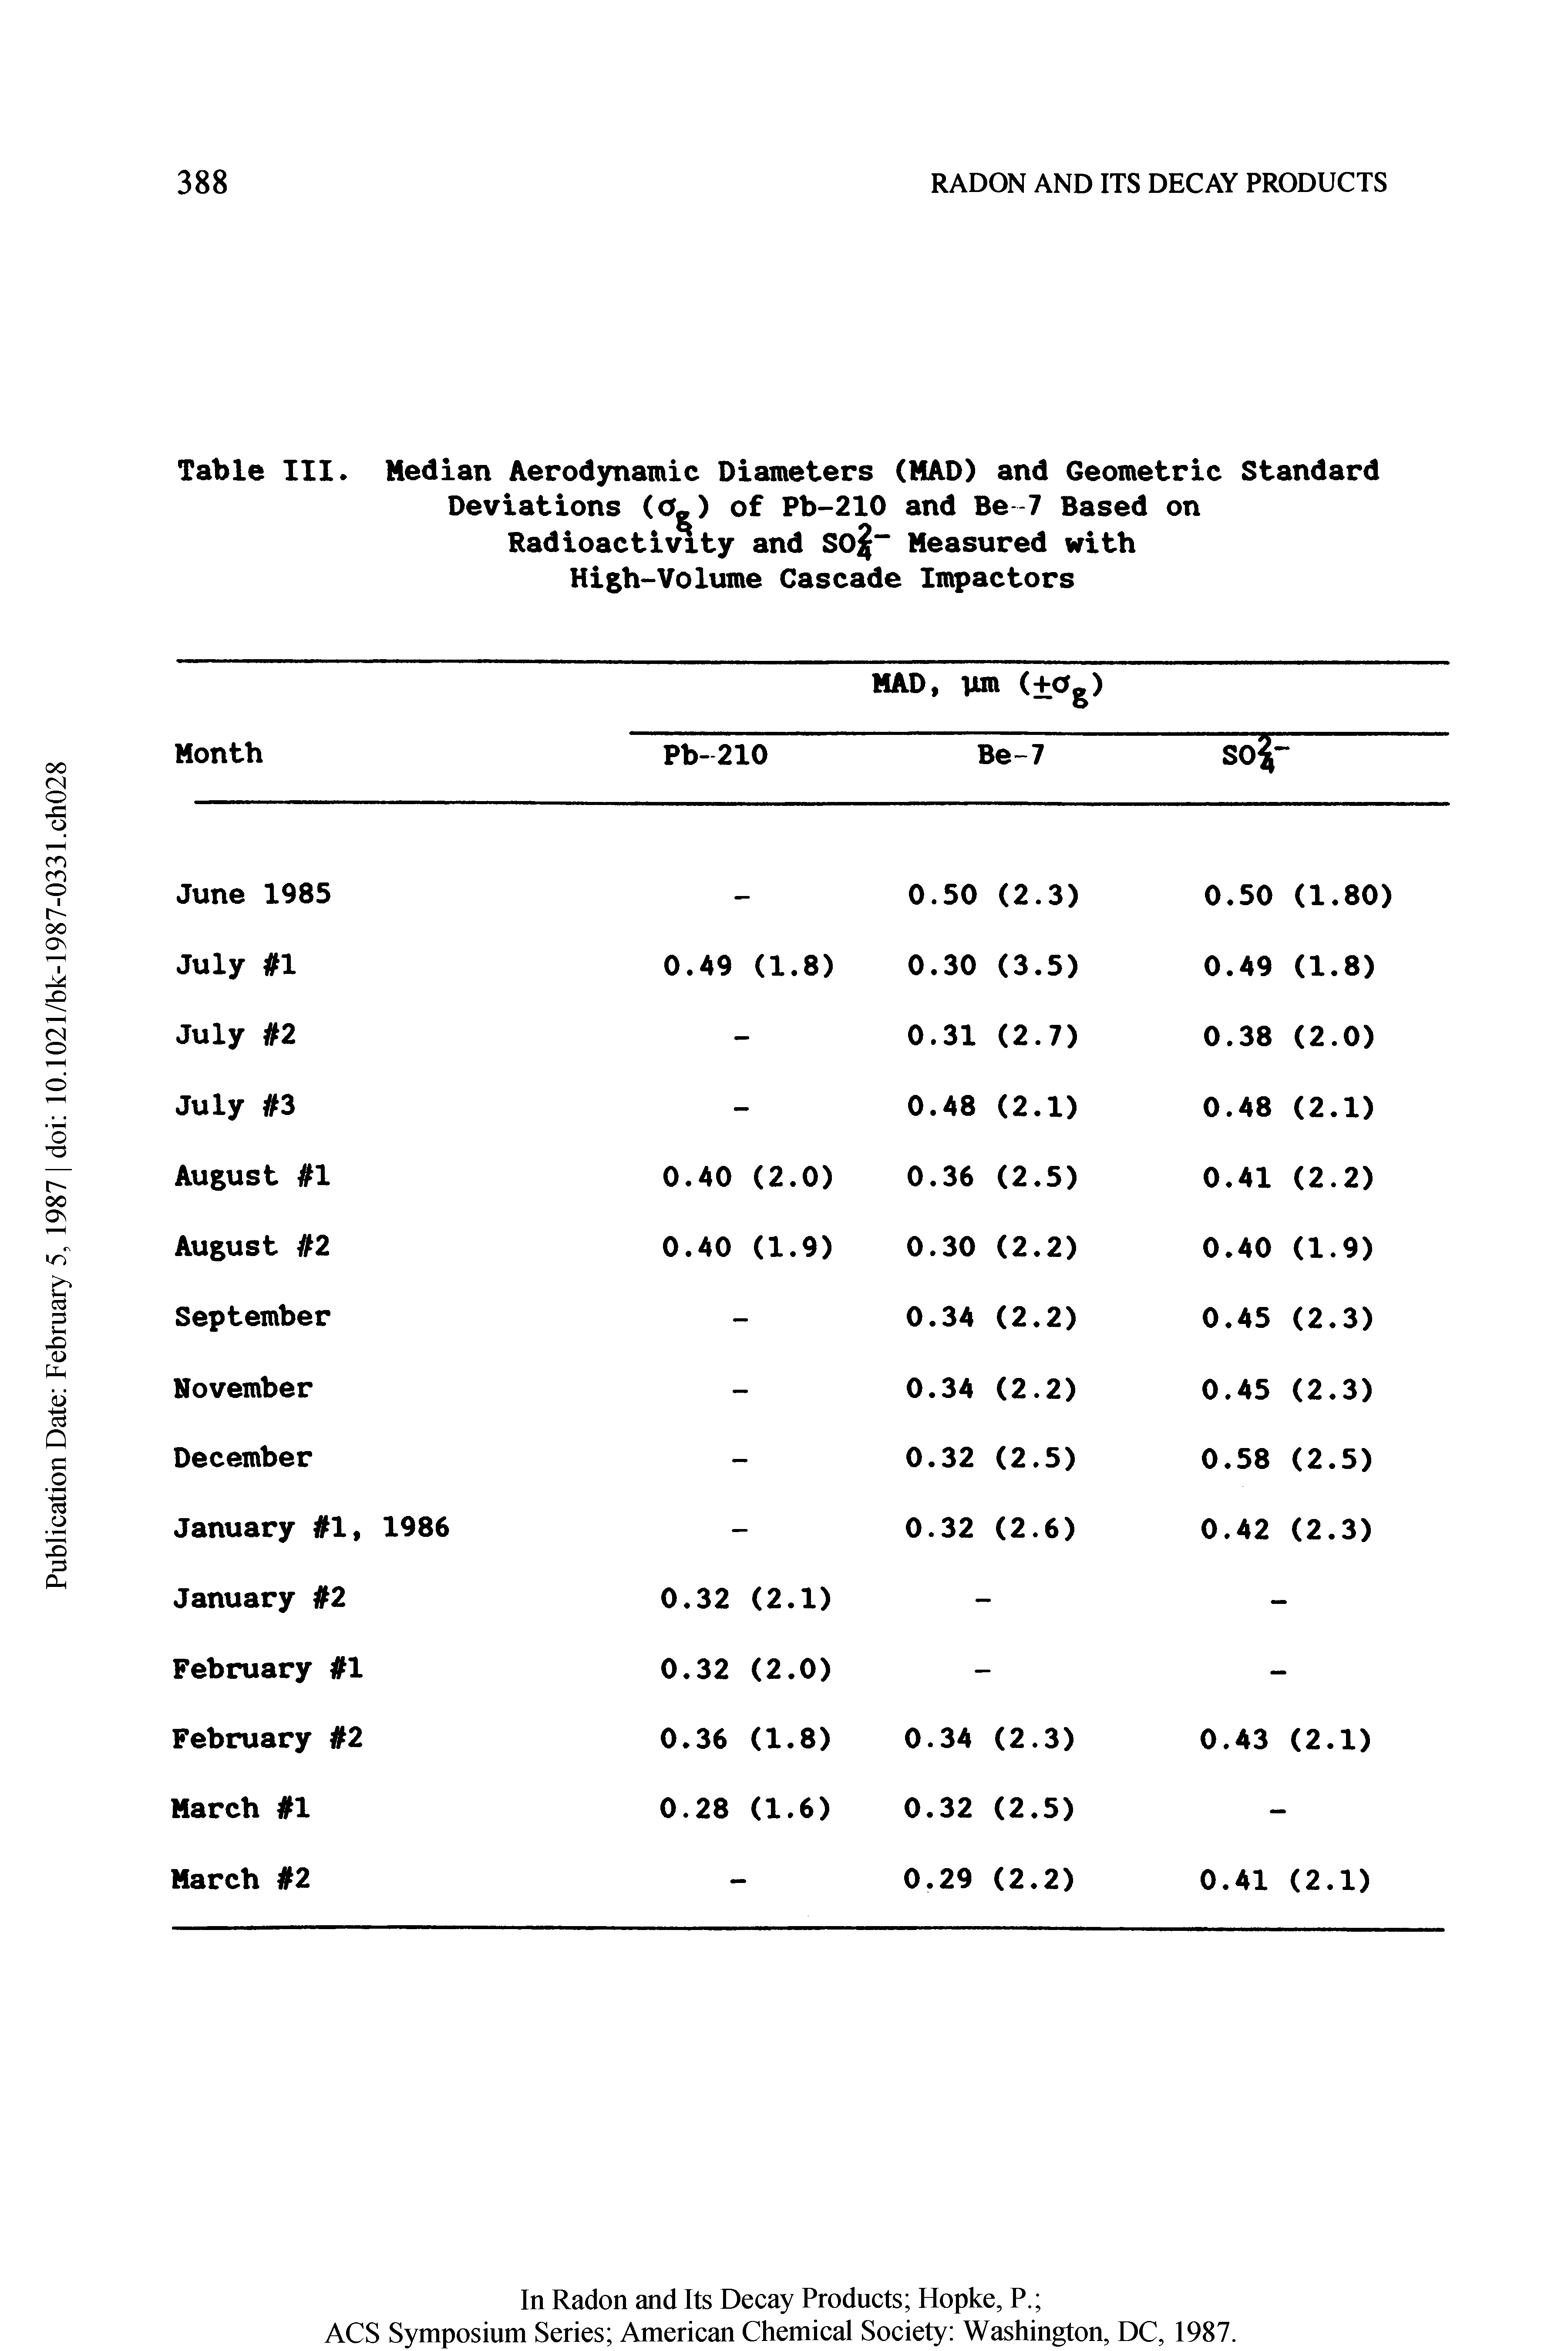 Table III. Median Aerodynamic Diameters (MAD) and Geometric Standard Deviations (Og) of Pb-210 and Be-7 Based on Radioactivity and SO Measured with High-Volume Cascade Impactors...